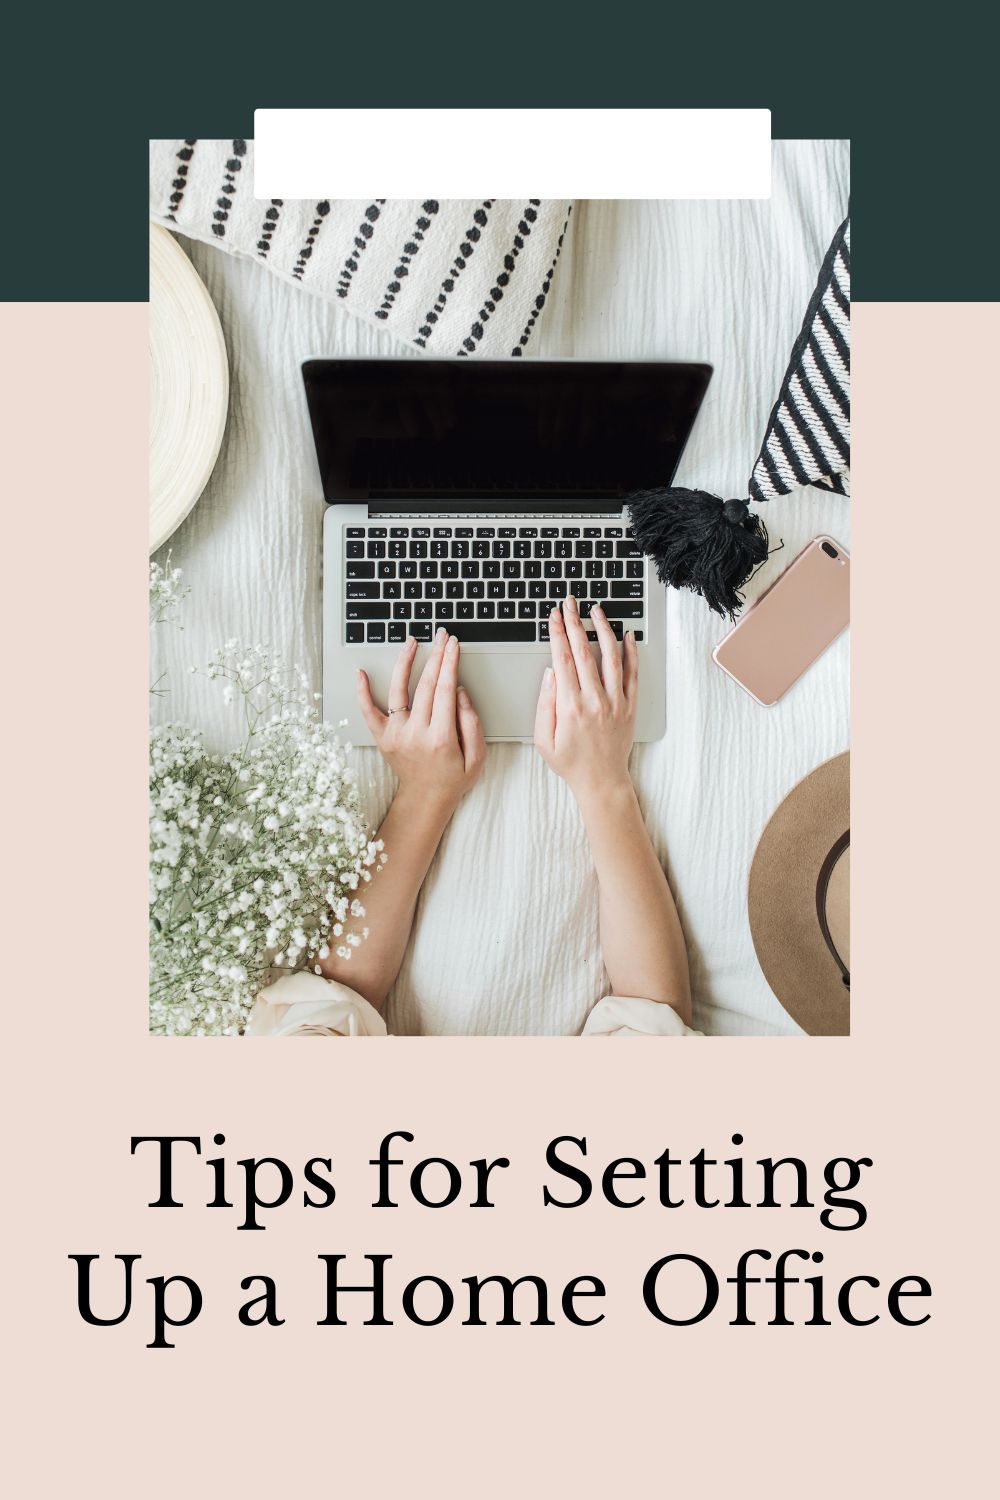 Tips for Setting Up a Home Office